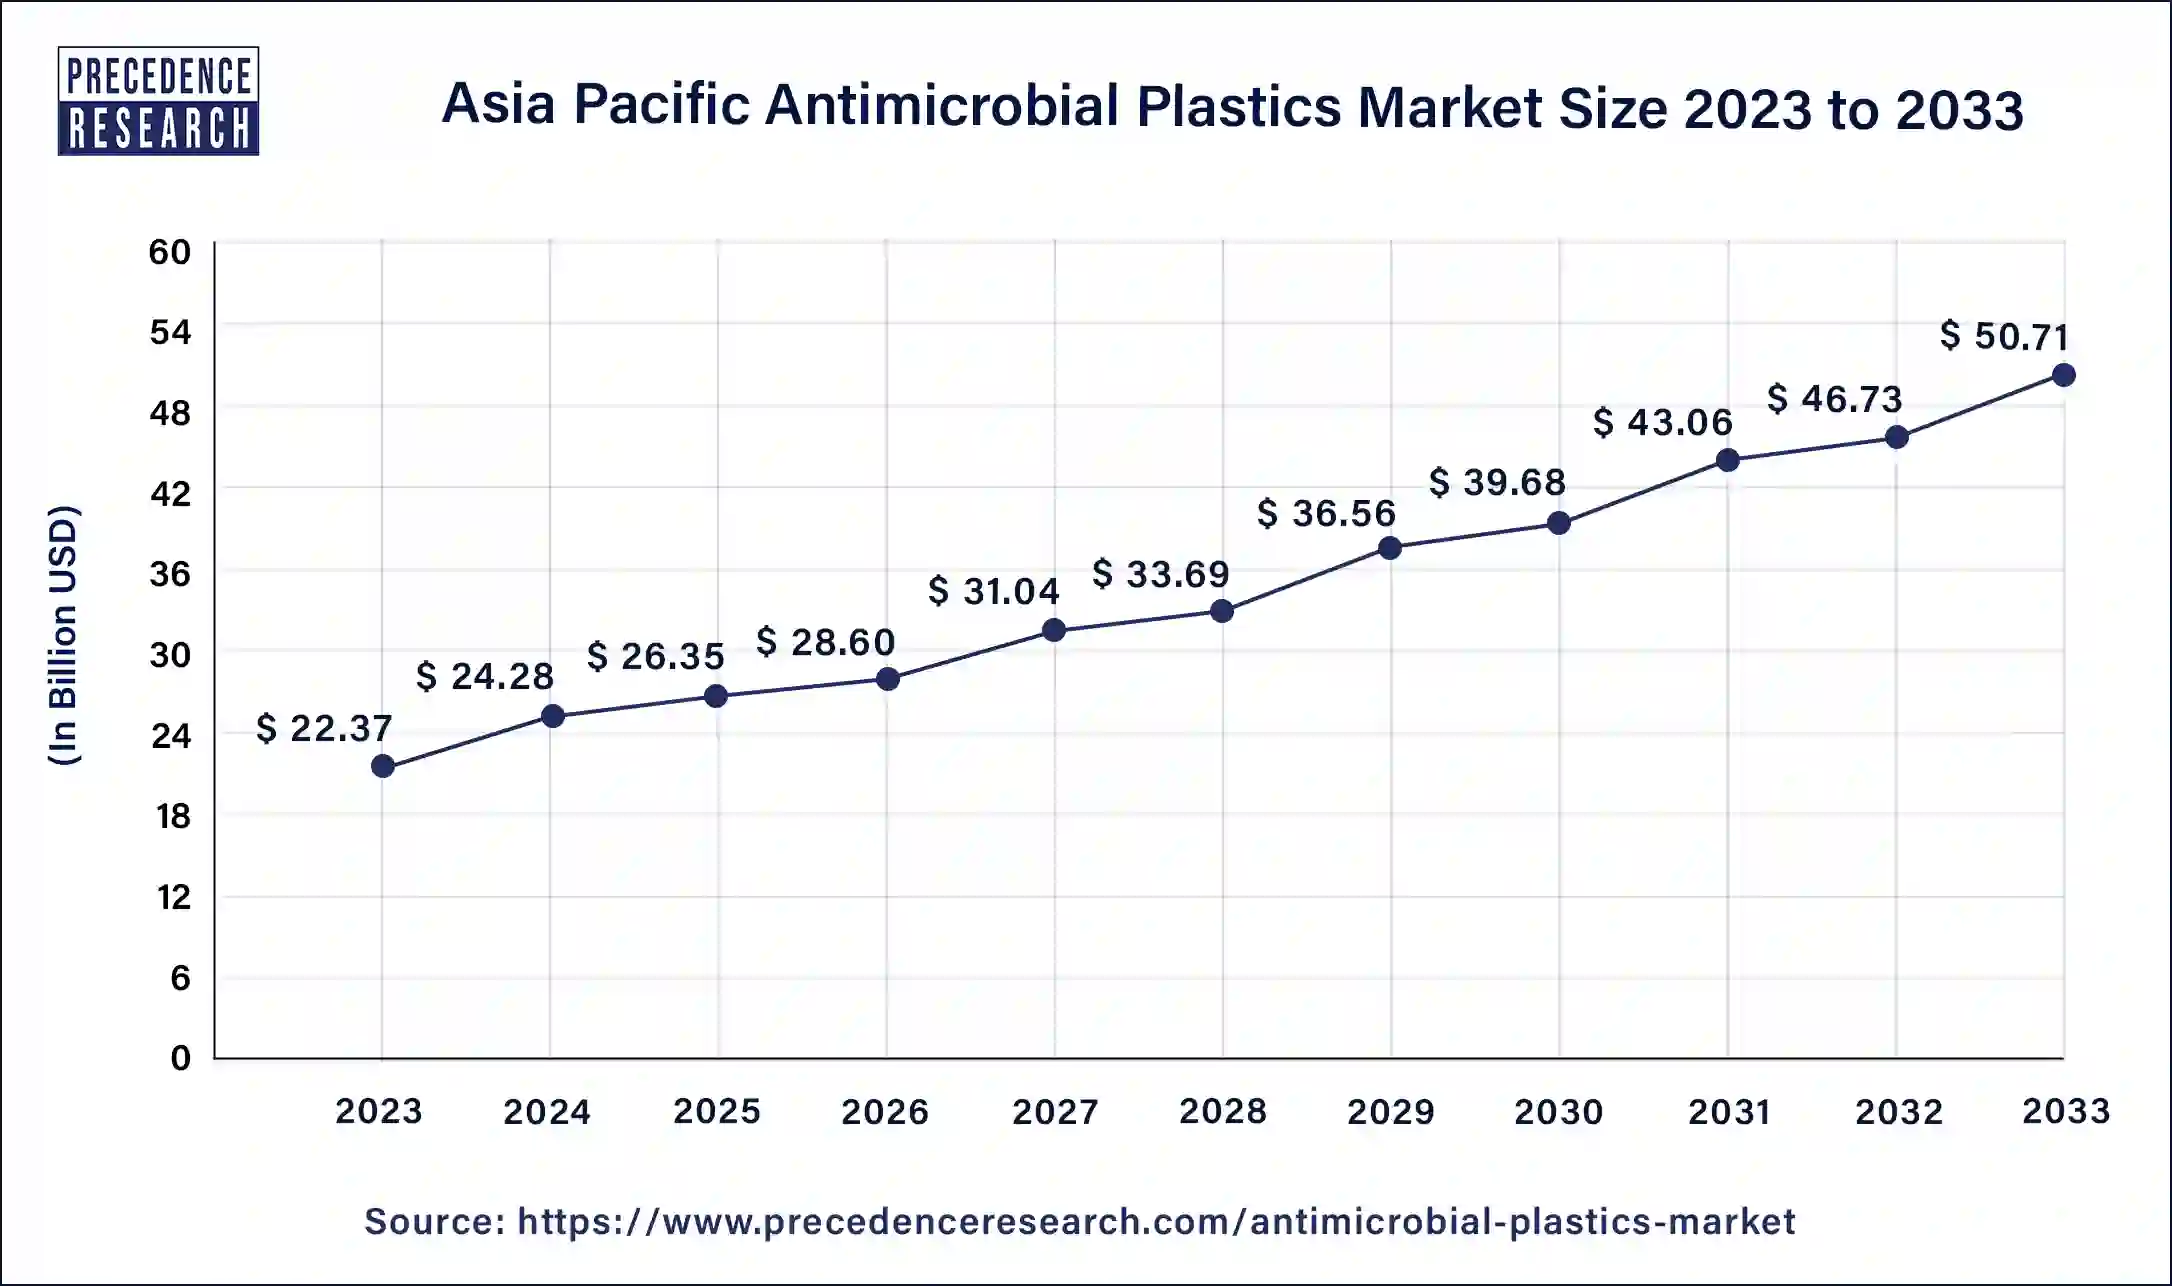 Asia Pacific Antimicrobial Plastics Market Size 2024 to 2033